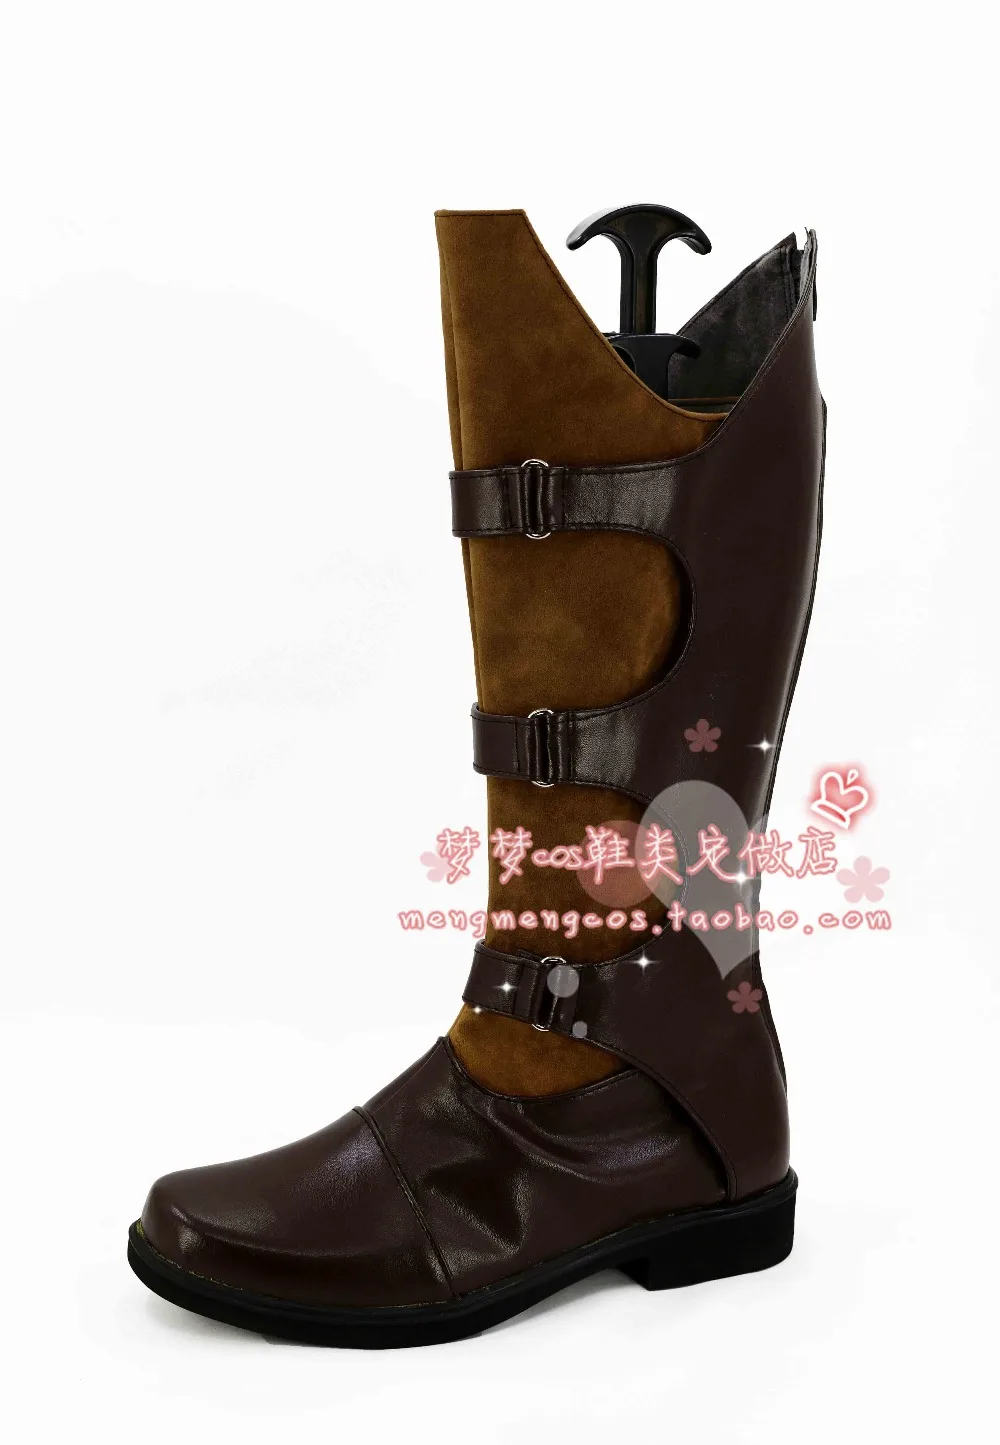 of the Galaxy Star Lord Peter Jason Quill cosplay shoes Boots Custom Made 